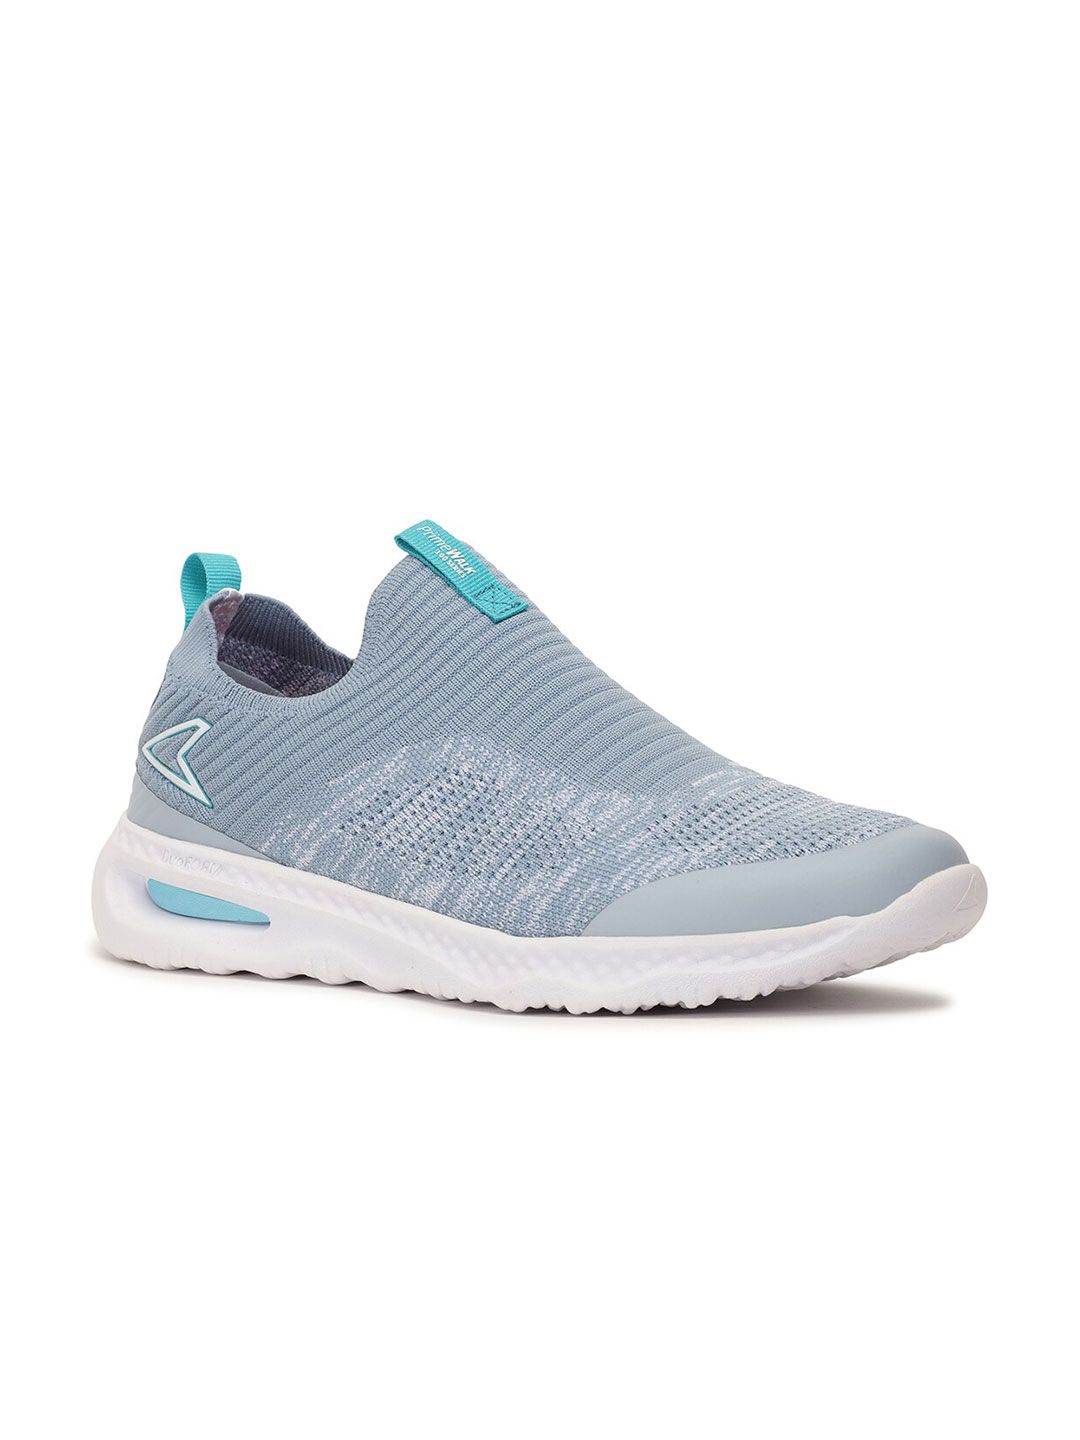 Power Women Blue Walking Non-Marking Sneakers Shoes Price in India